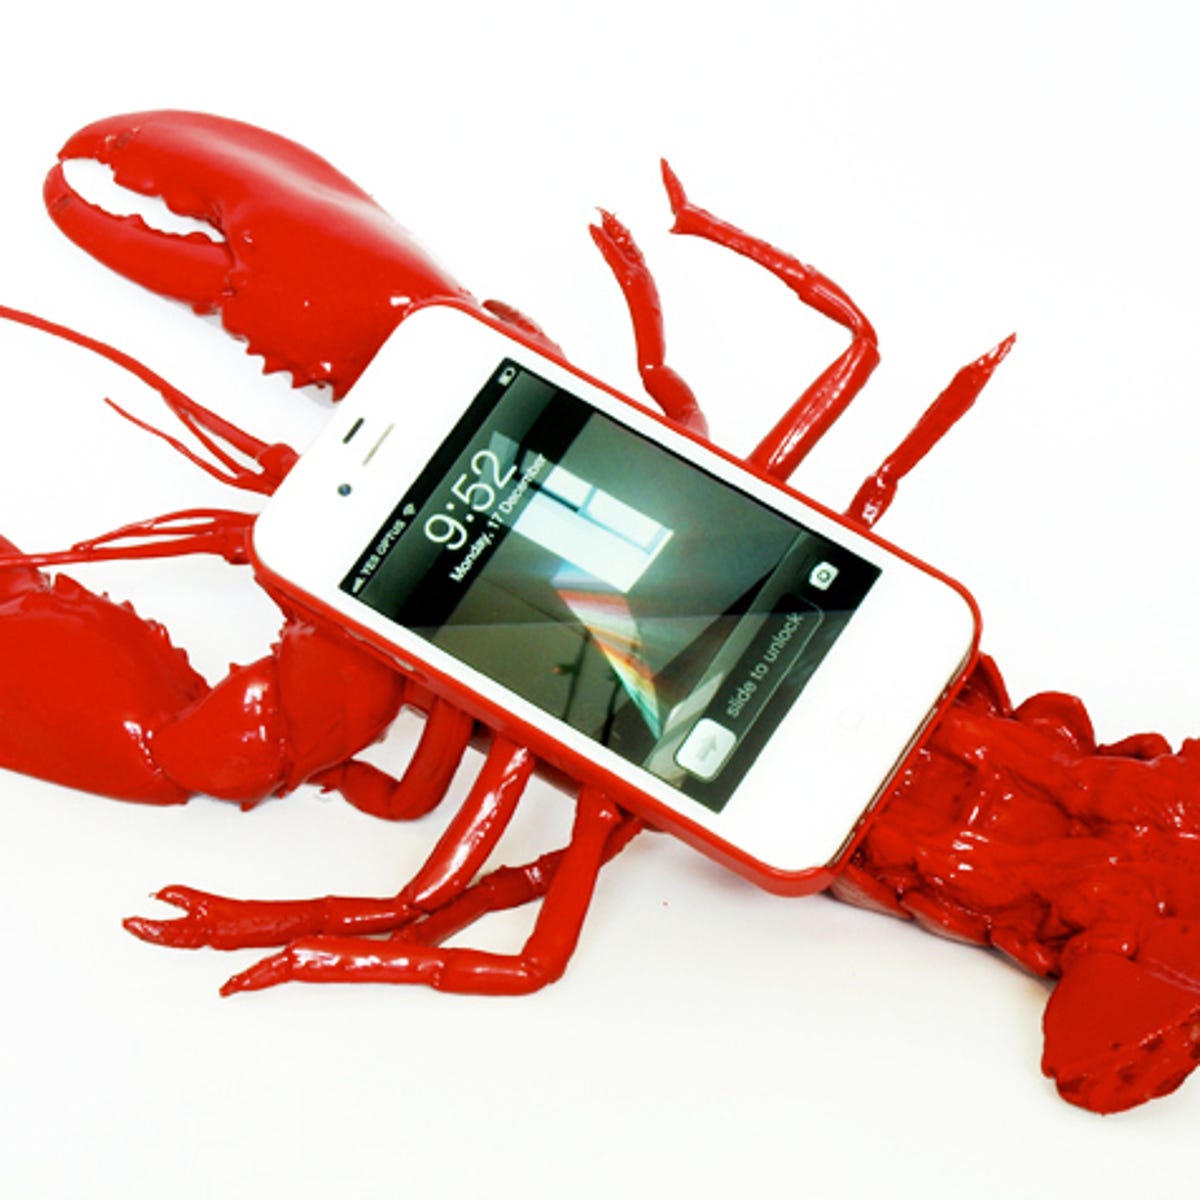 iPhone case - is impractical delightfully CNET Lobster